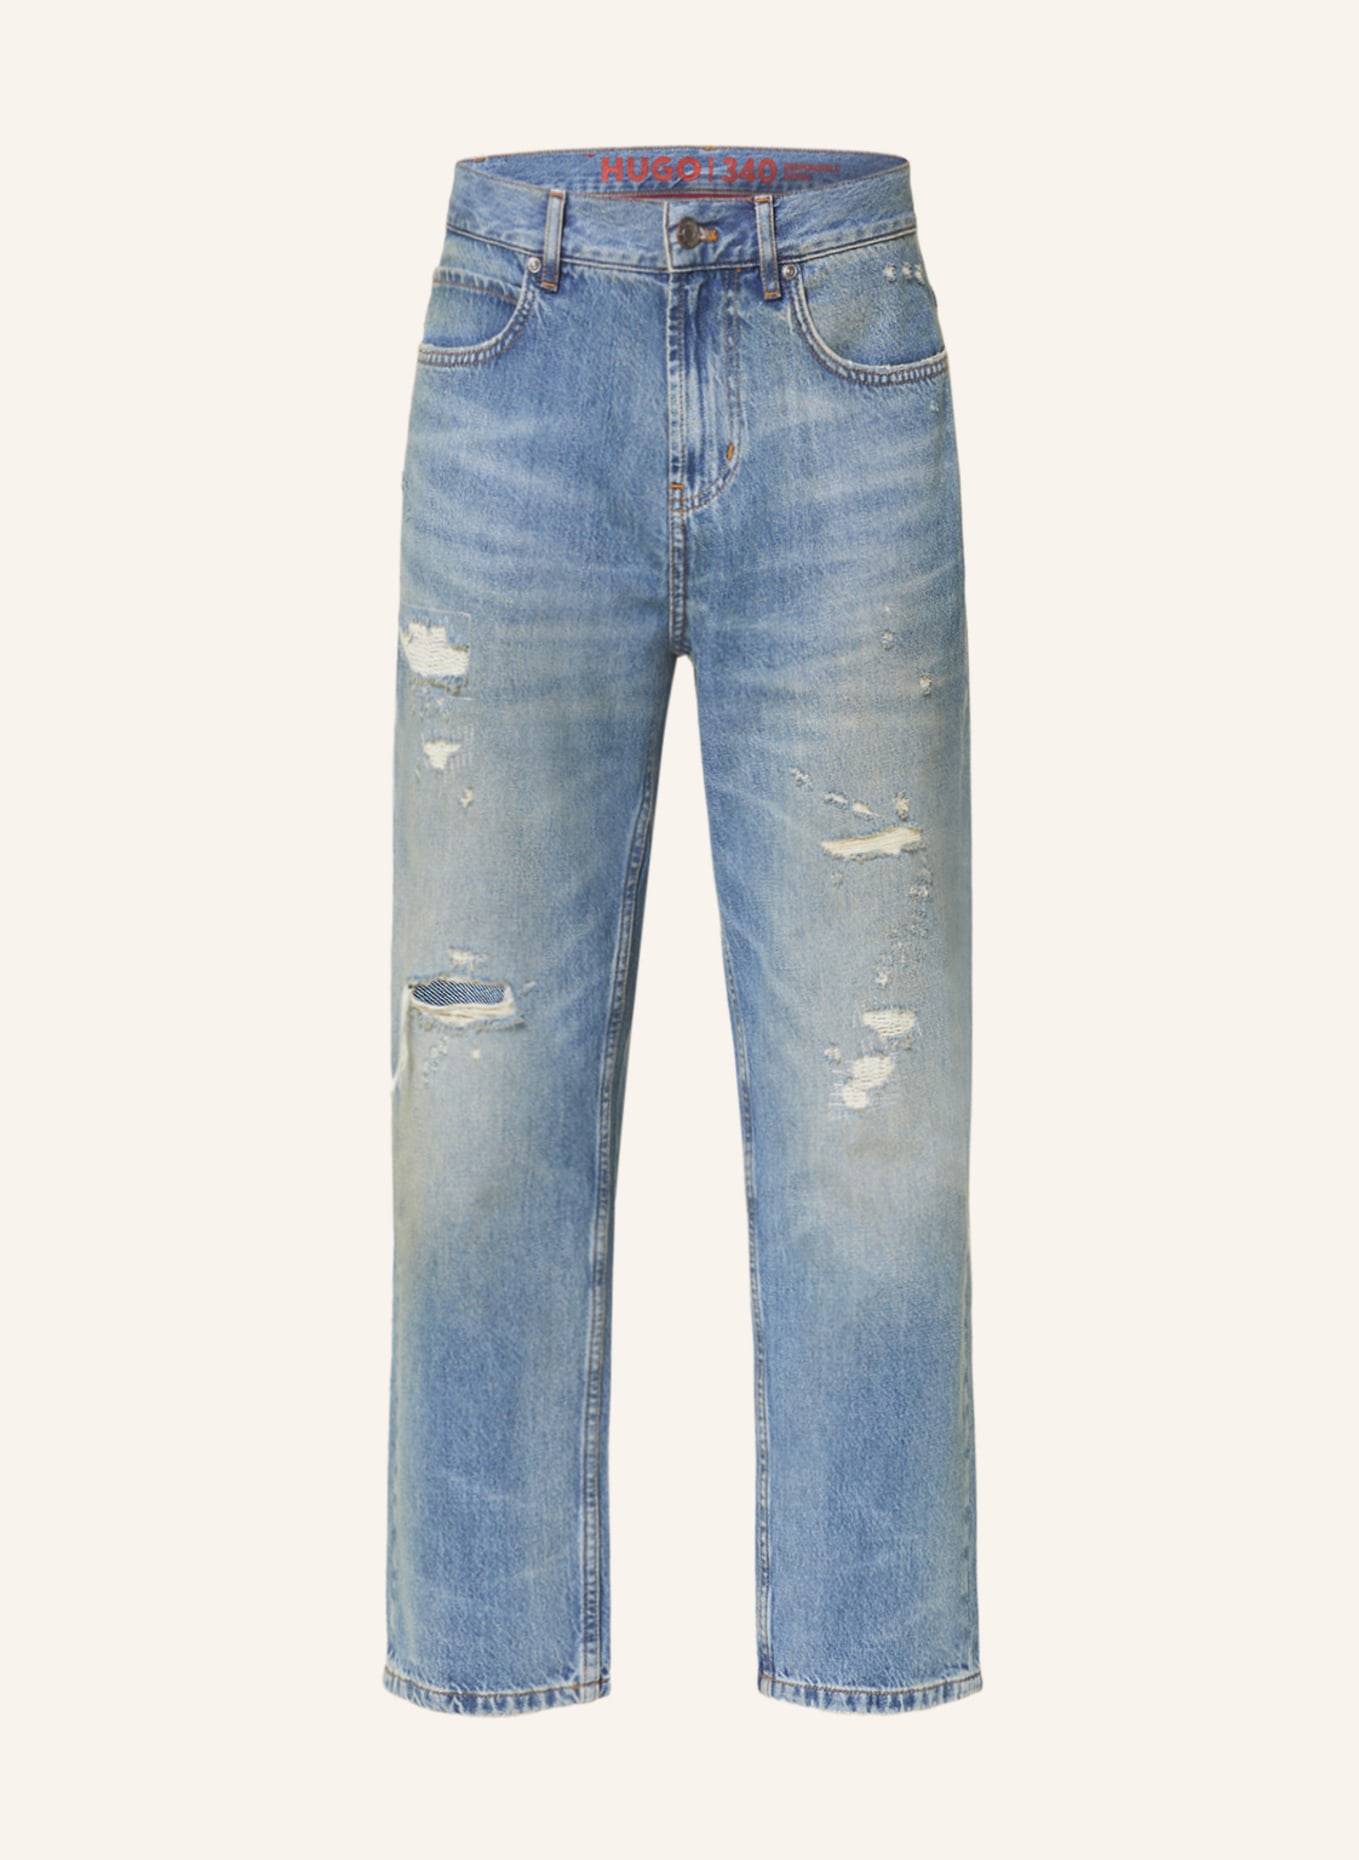 HUGO Destroyed Jeans Loose Tapered Fit, Farbe: 431 BRIGHT BLUE (Bild 1)